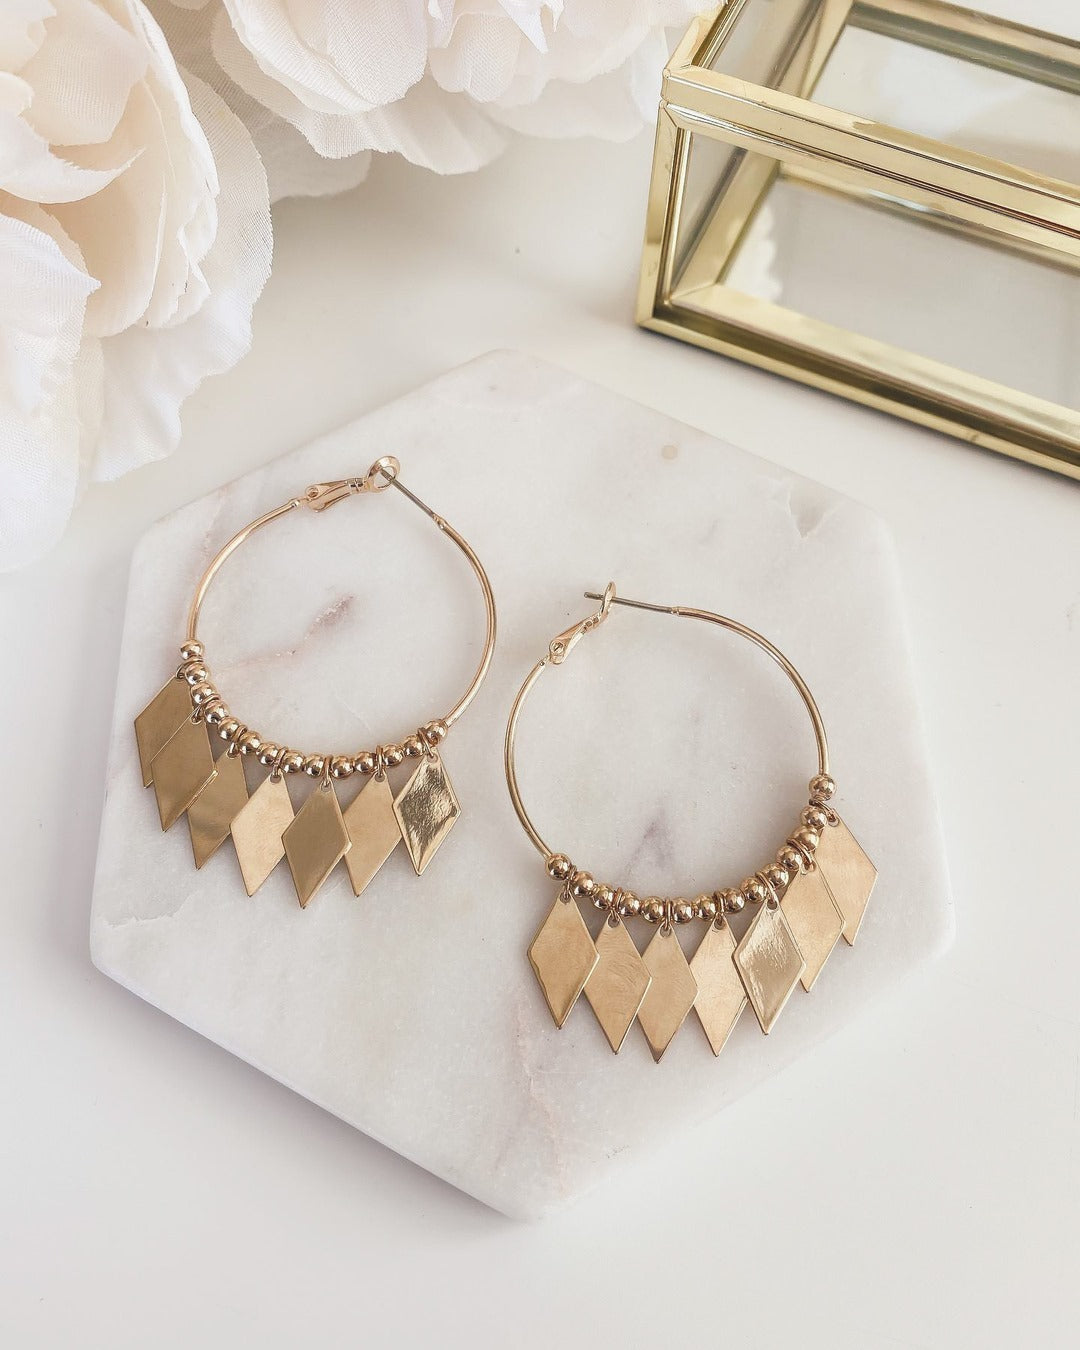 Kinsley Armelle Goddess Collection- Brynlee Earrings